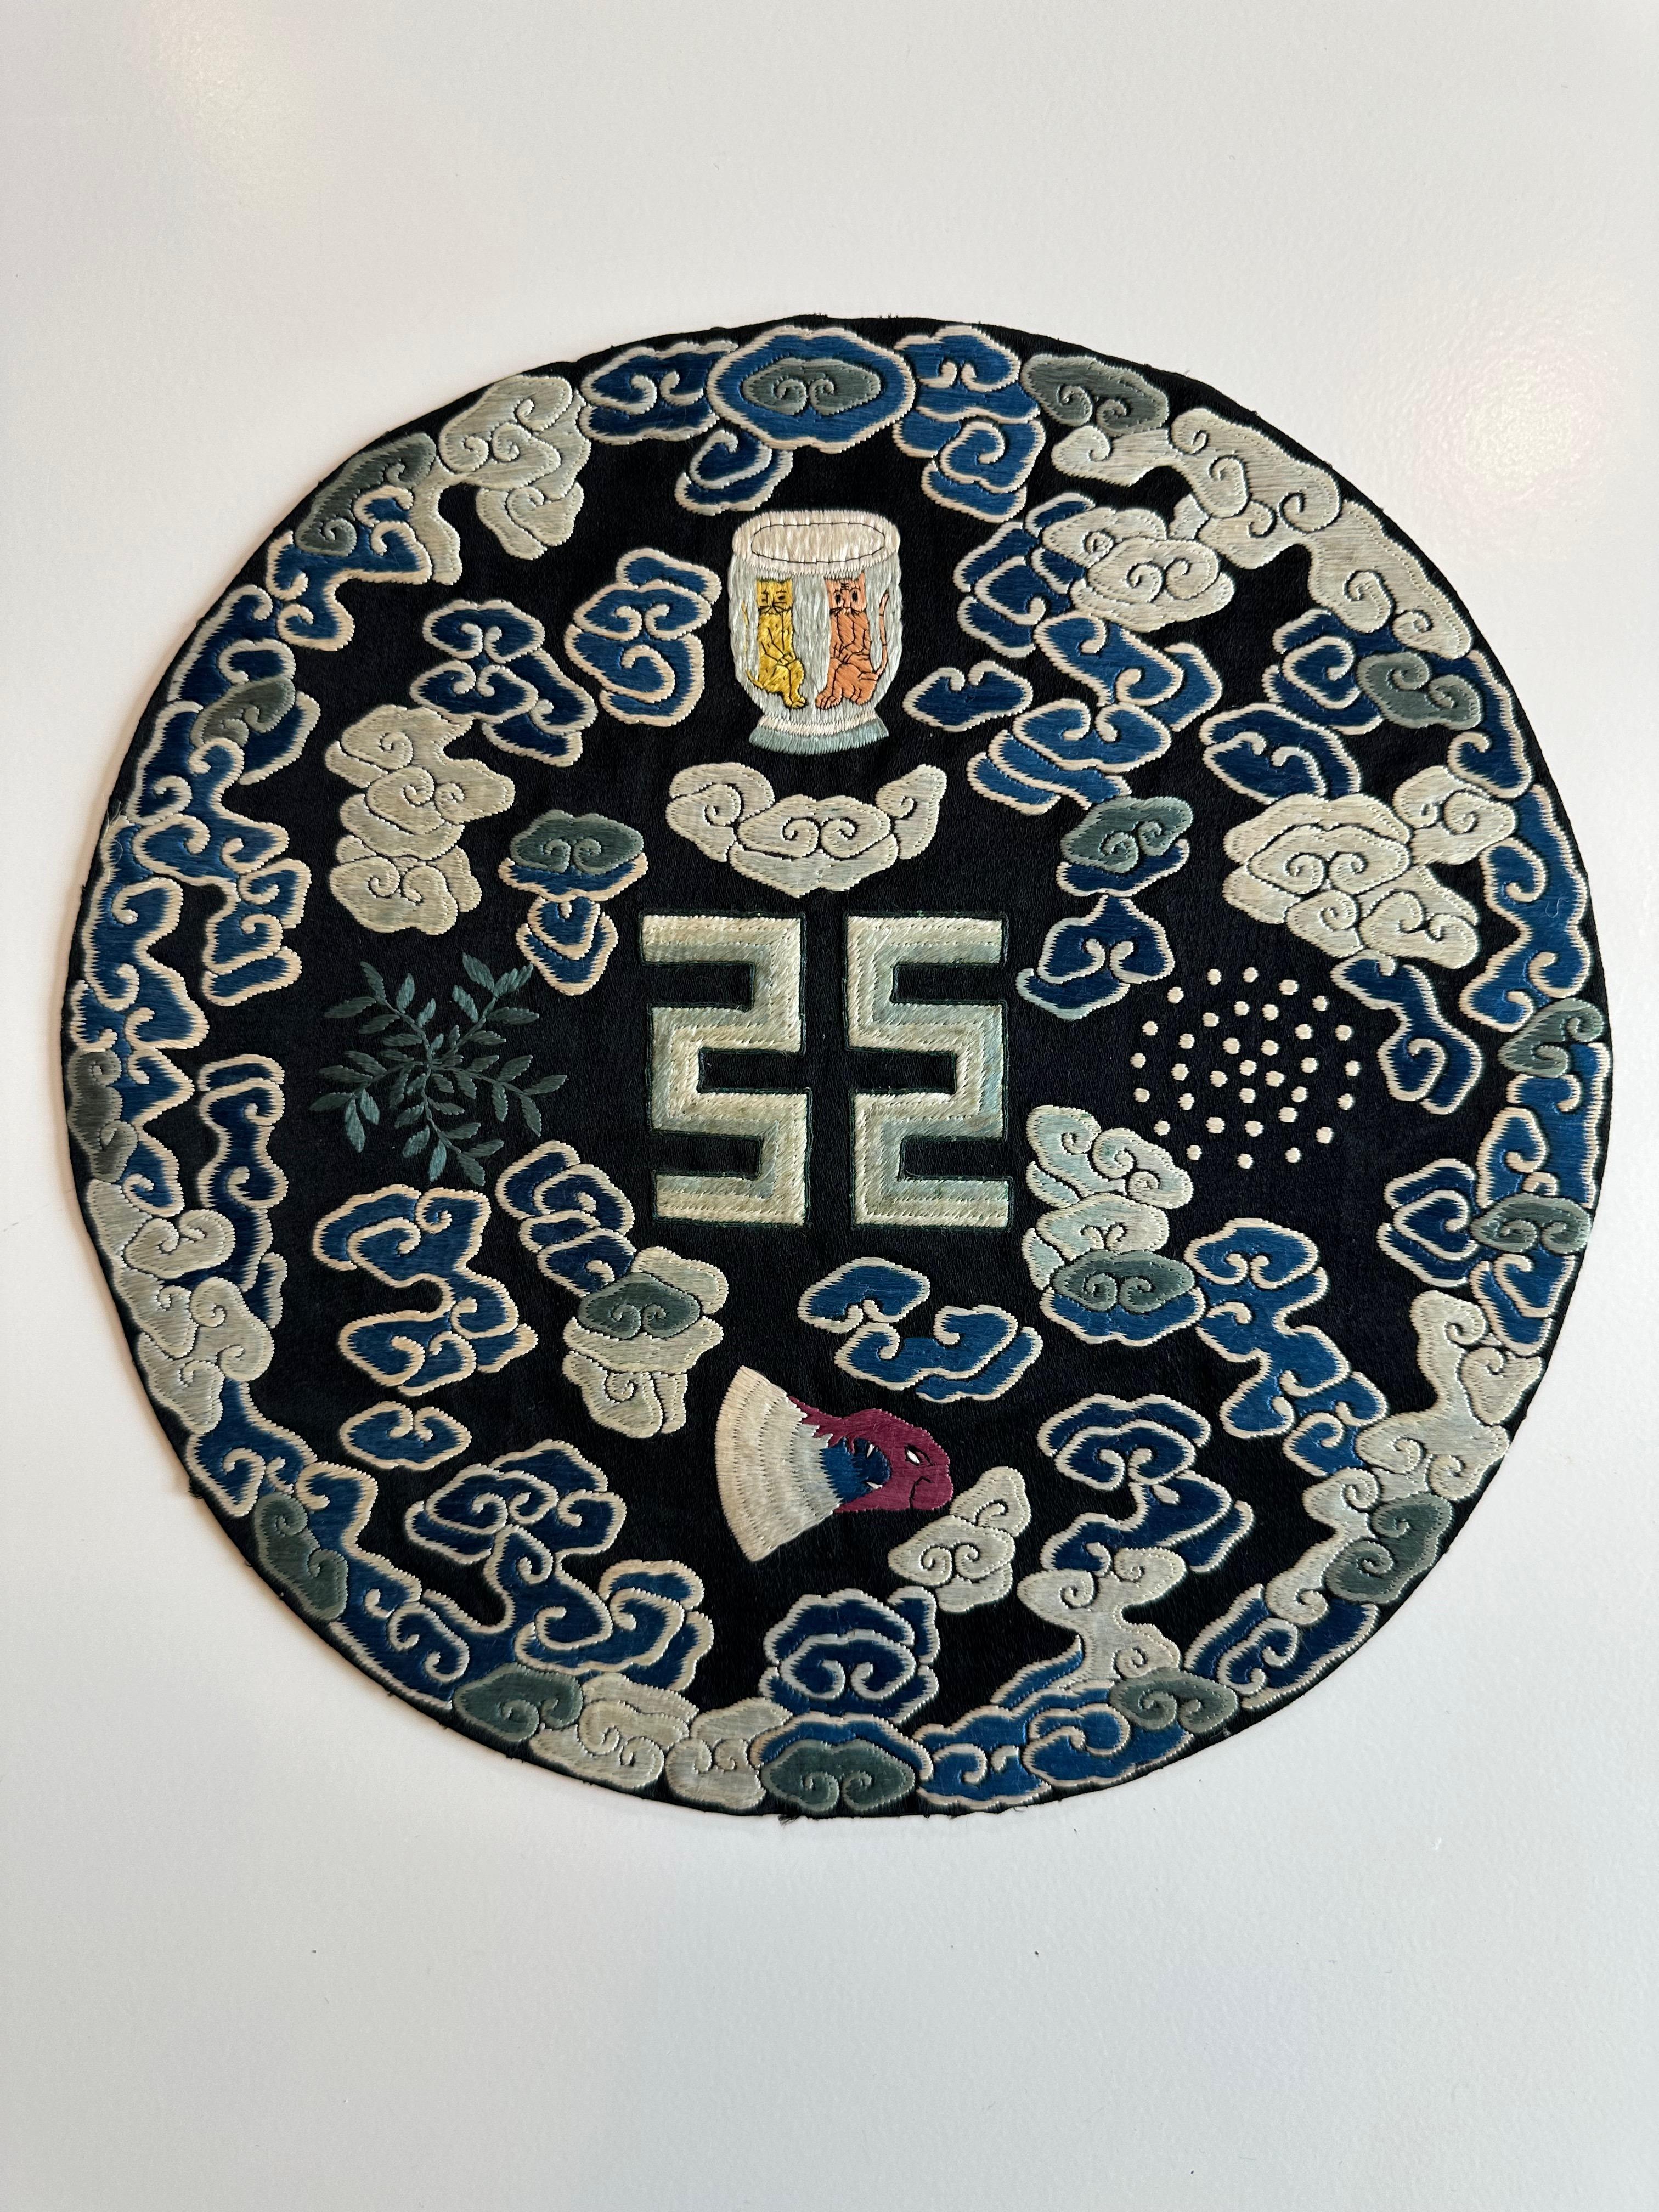 This medallion, which would have been sewn on a robe, depicts a number of symbols on a background of light and dark blue clouds. The central symbol is Fu, which represents the power to judge, while the axe head below represents the power to punish.